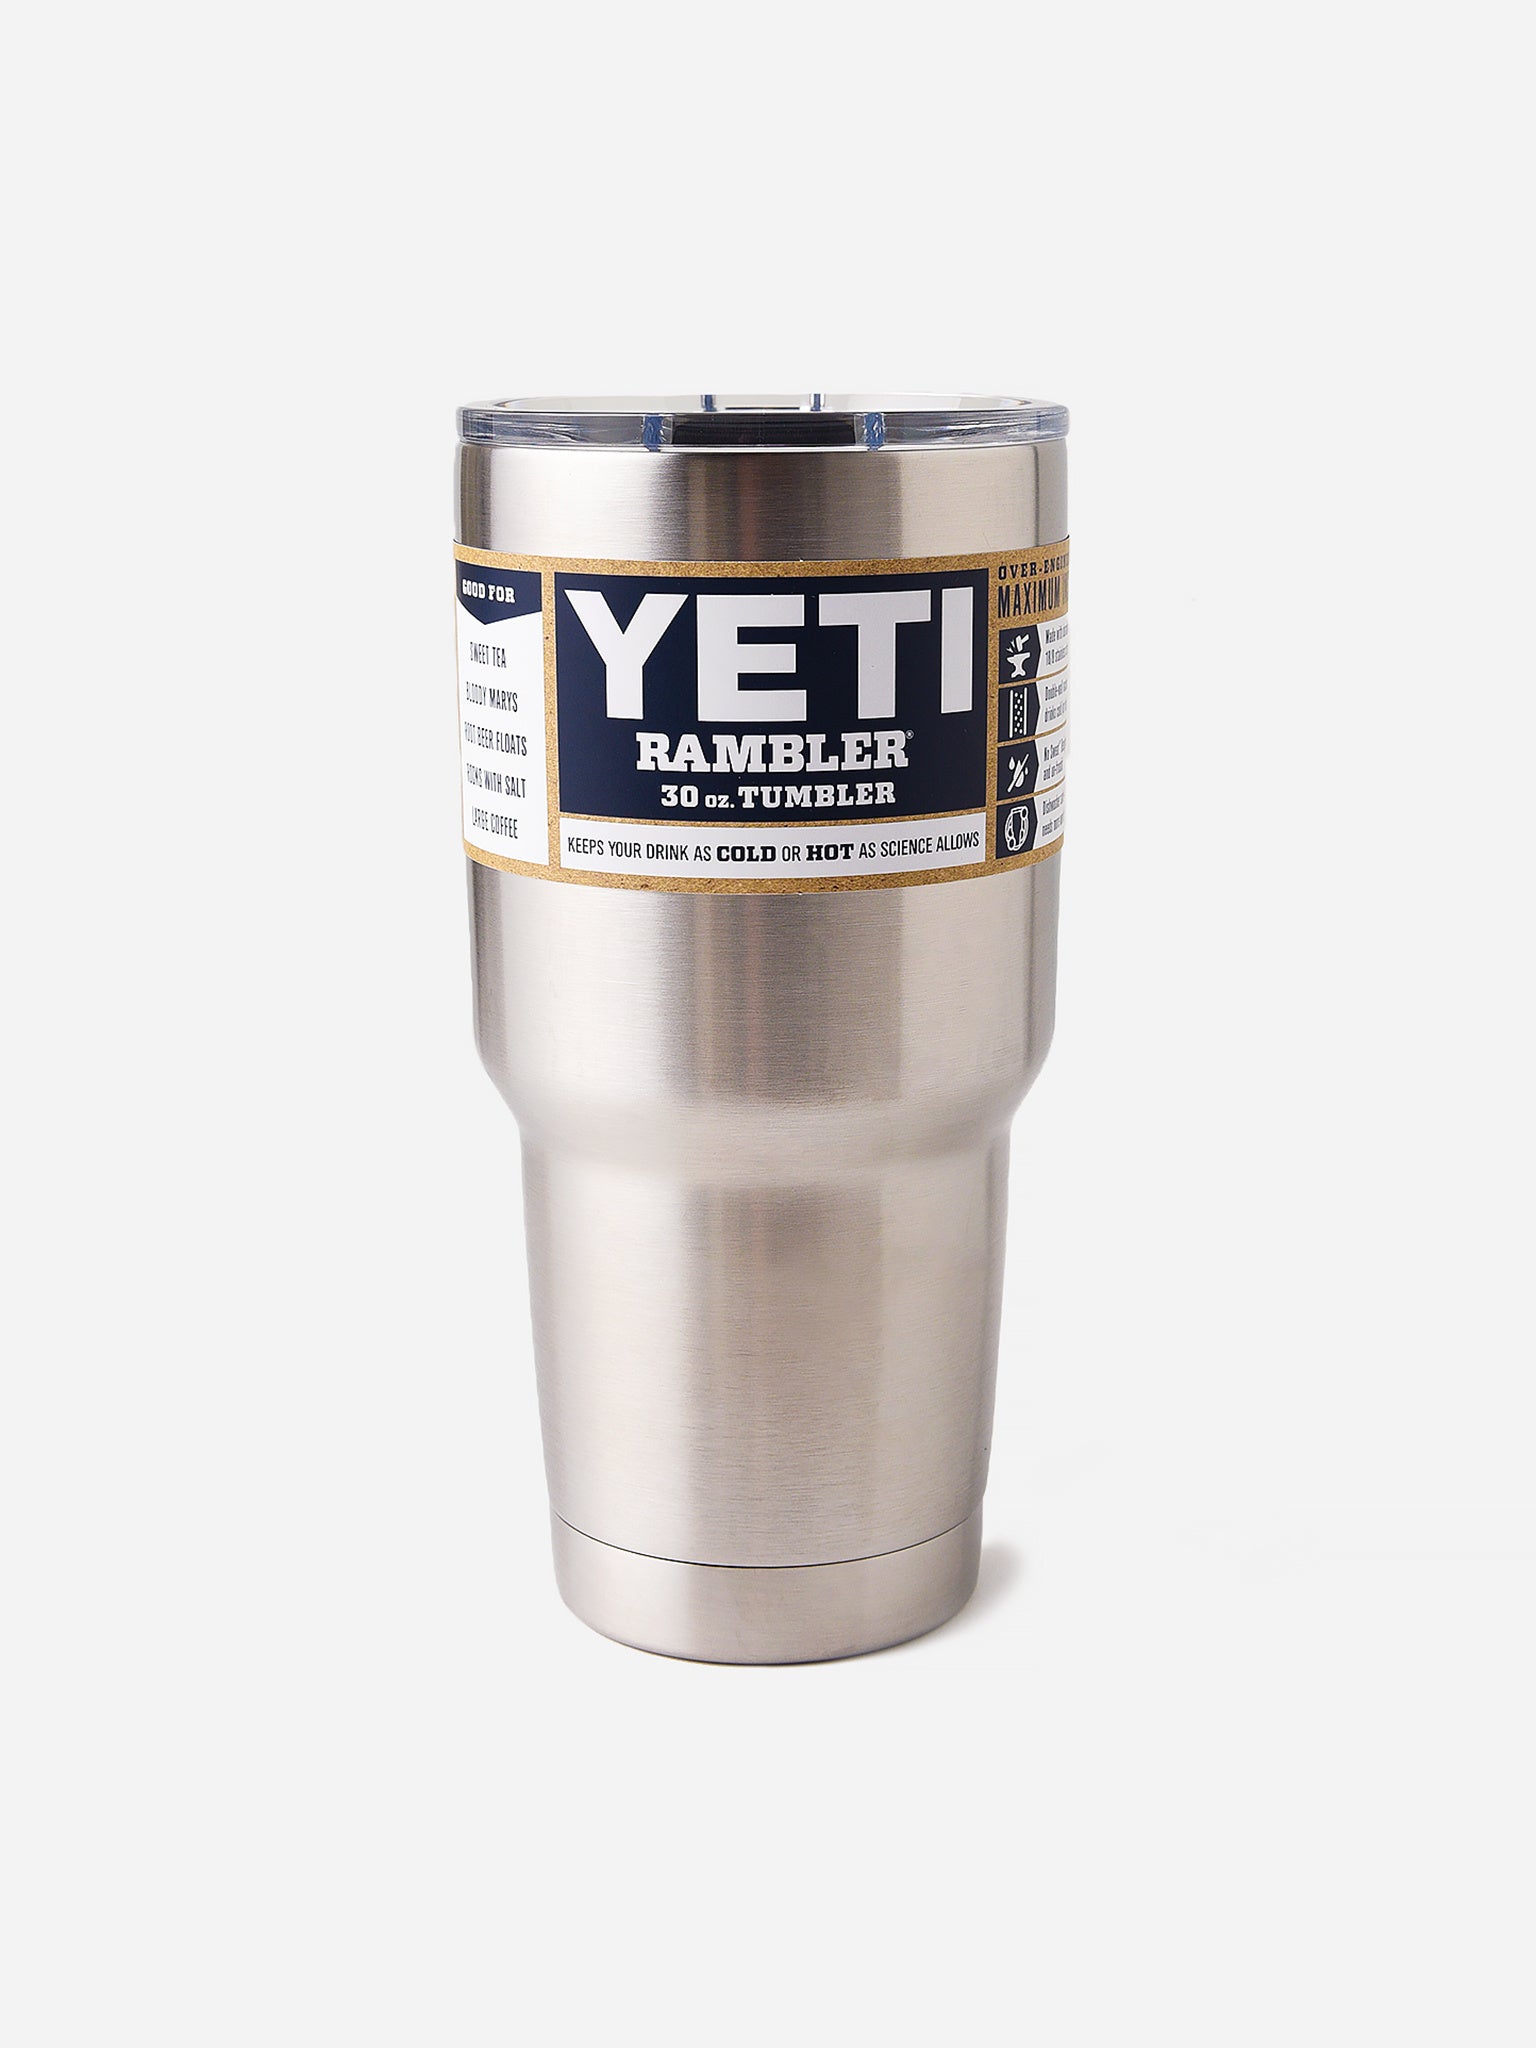 Yeti Stainless Steel Rambler 20 oz and 30 oz Coffee Tumblers with